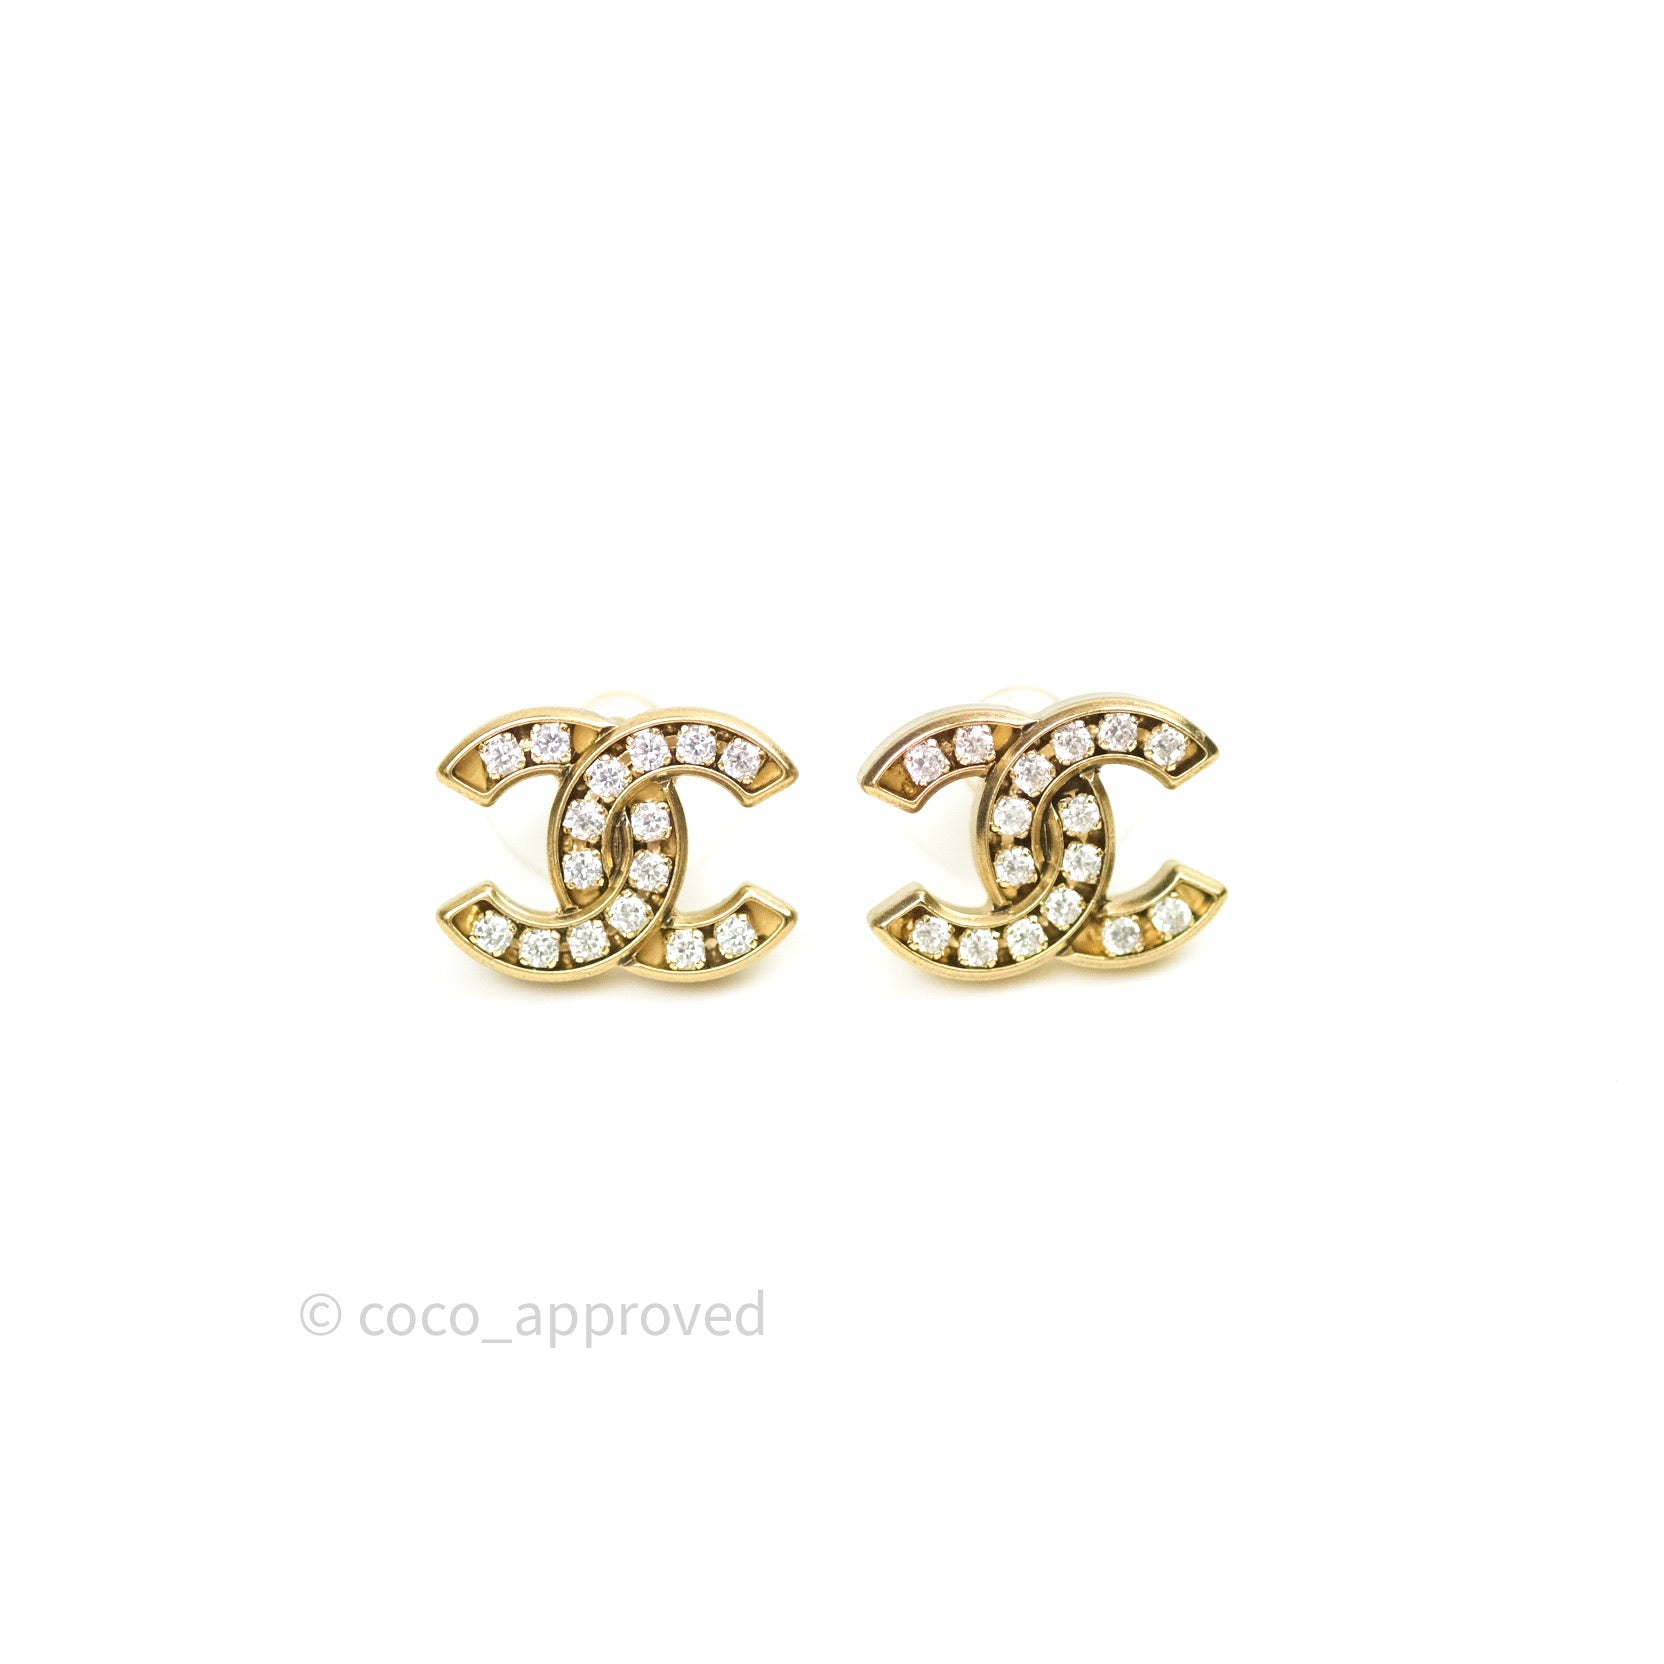 Chanel Crystal CC Earrings Gold Tone – Coco Approved Studio